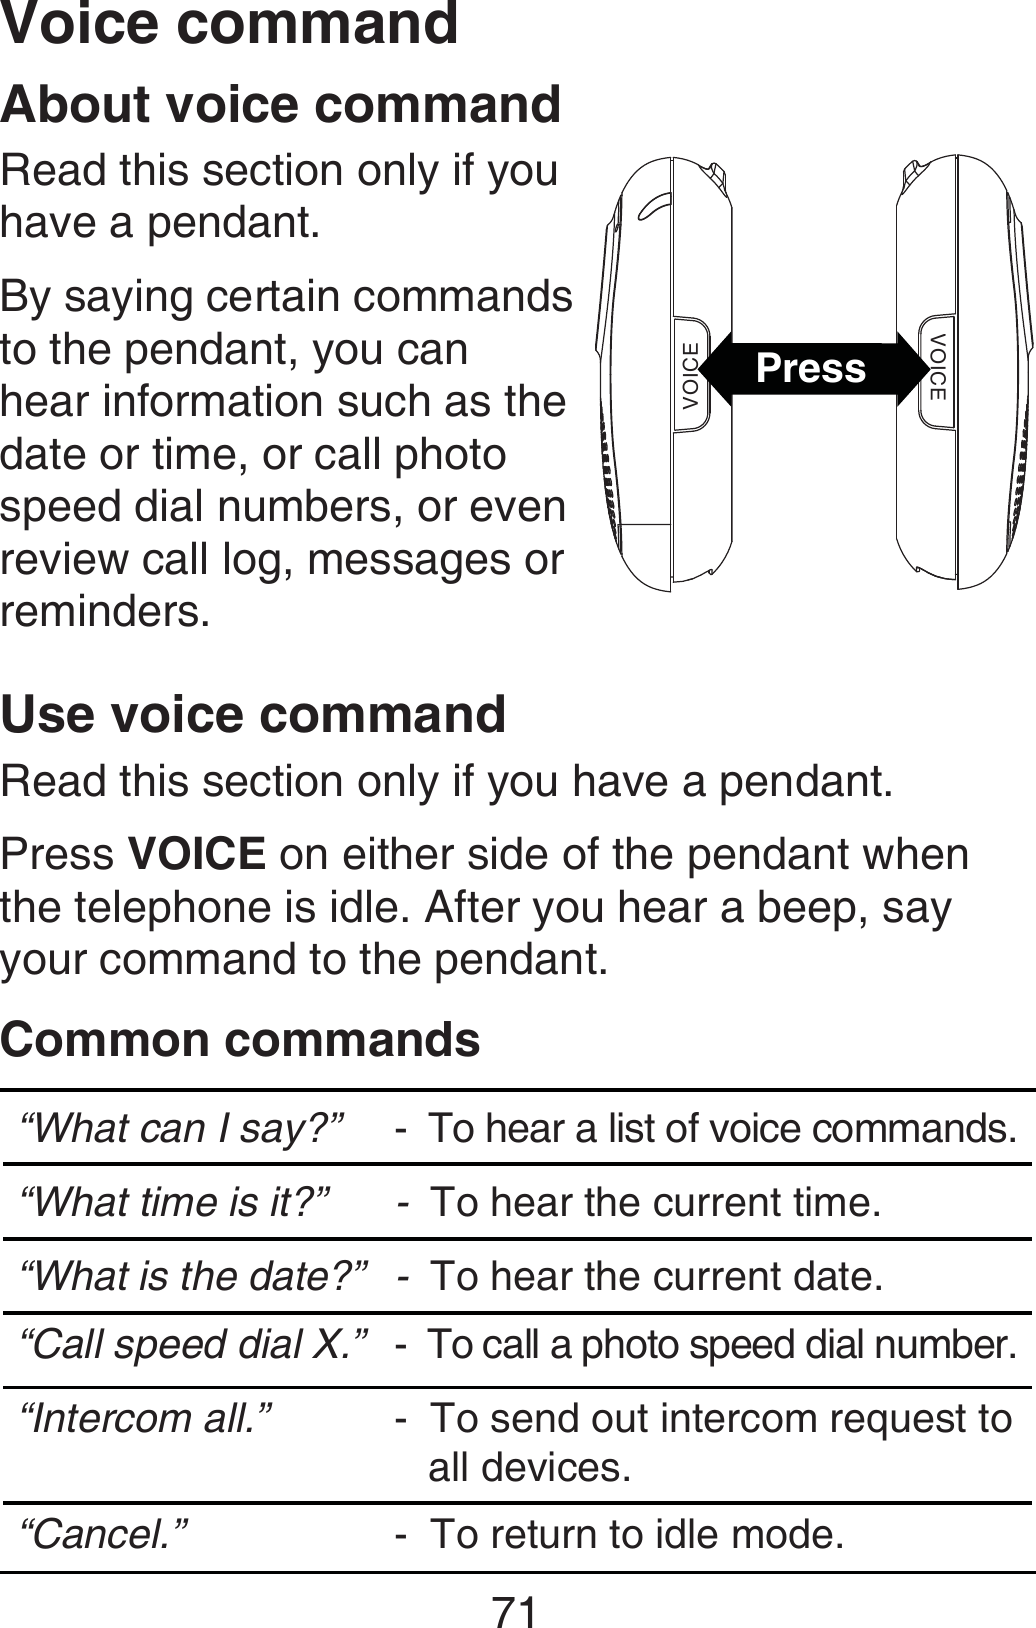 71About voice commandRead this section only if you have a pendant.By saying certain commands to the pendant, you can hear information such as the date or time, or call photo speed dial numbers, or even review call log, messages or reminders.Use voice commandRead this section only if you have a pendant.Press VOICE on either side of the pendant when the telephone is idle. After you hear a beep, say your command to the pendant.Common commands“What can I say?”  -  To hear a list of voice commands.“What time is it?” -  To hear the current time.“What is the date?” -  To hear the current date.“Call speed dial X.” -  To call a photo speed dial number.“Intercom all.” -  To send out intercom request to    all devices.“Cancel.” -  To return to idle mode.VOICEVOICEPressVoice command